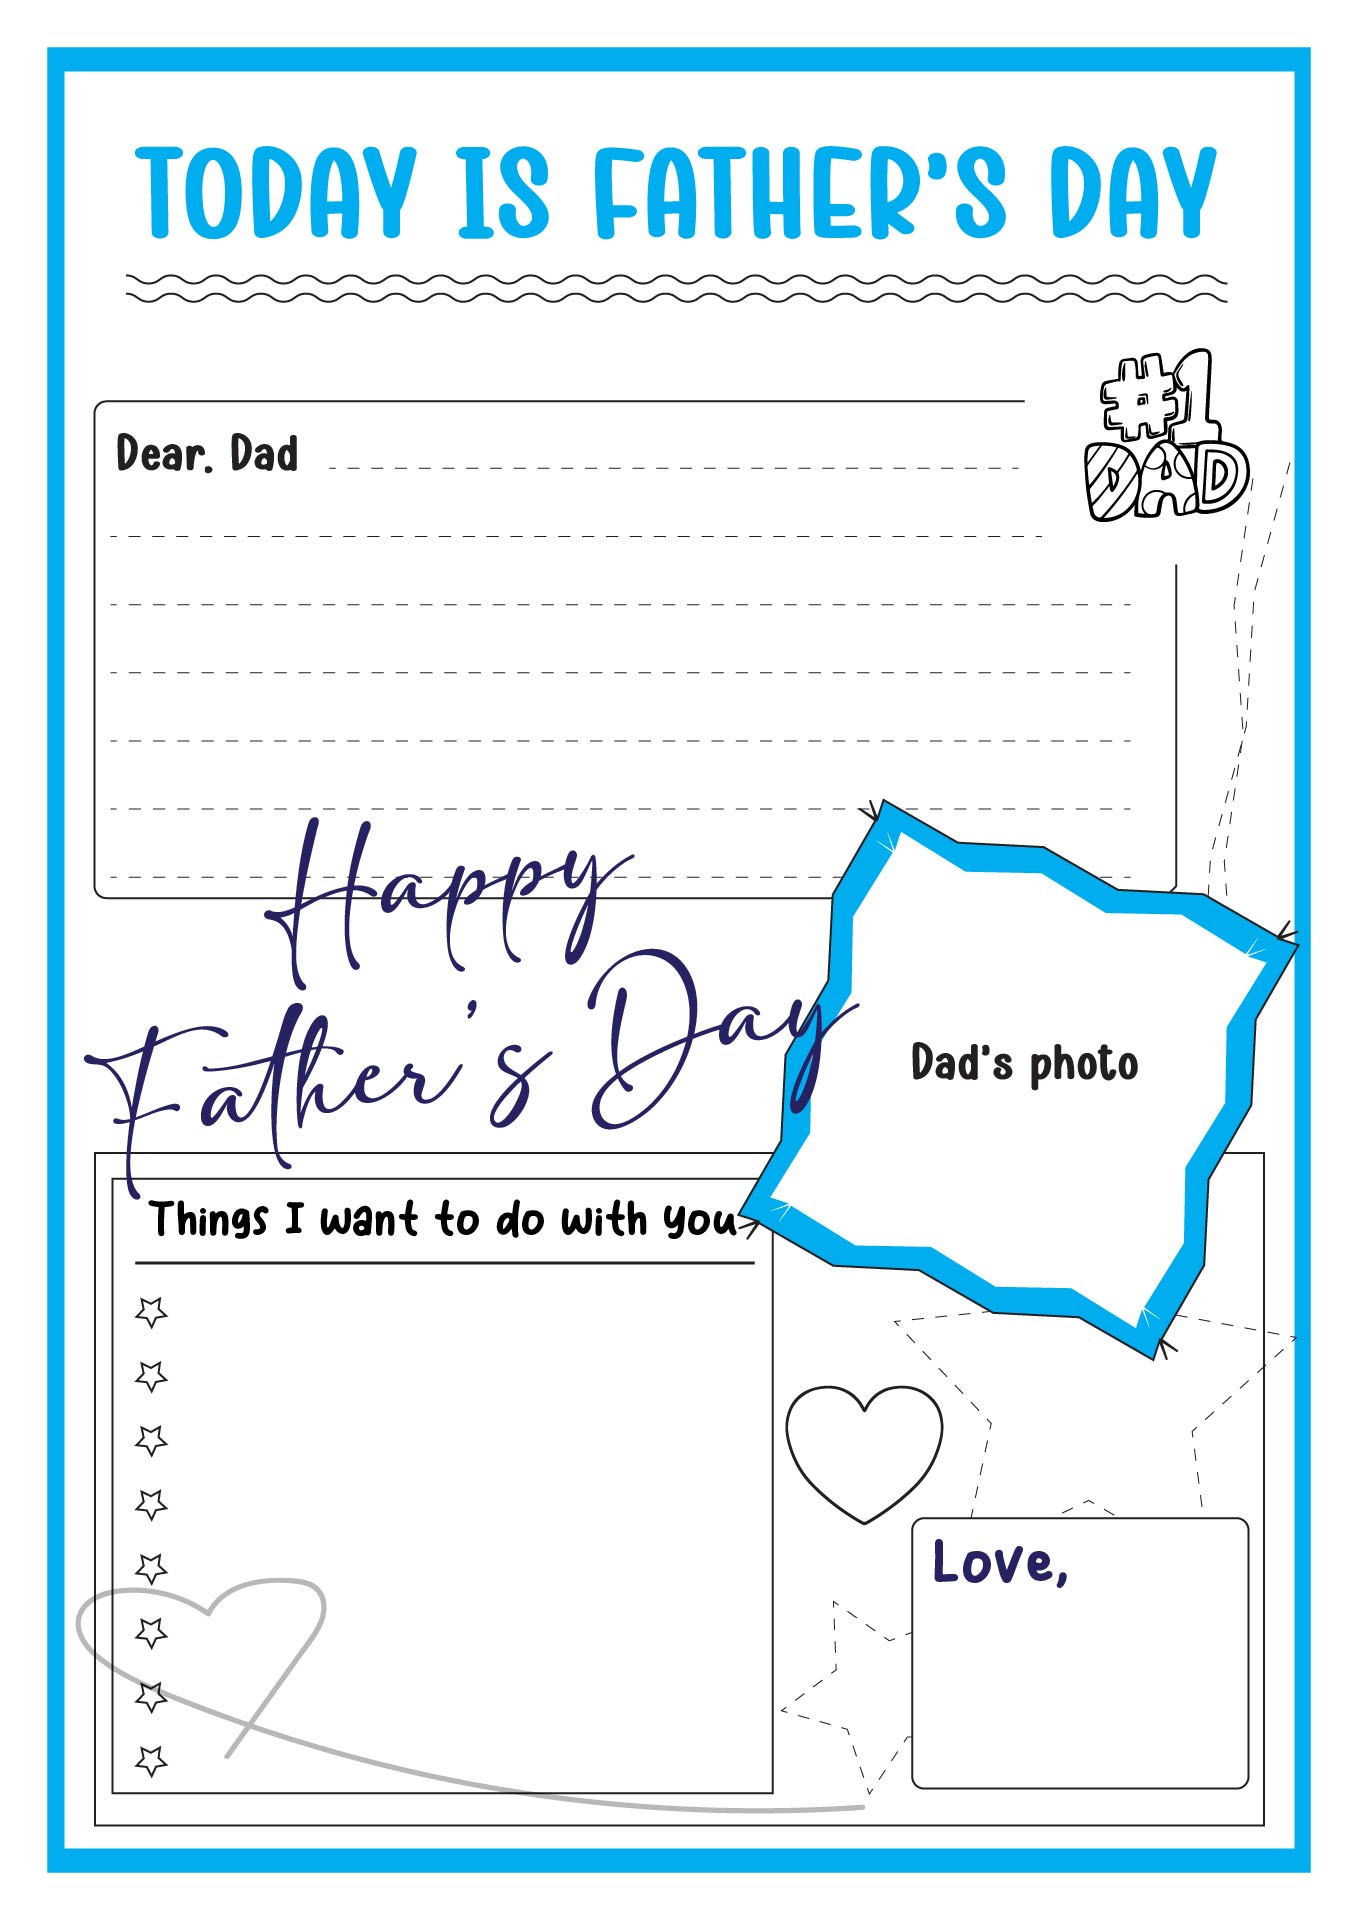 Free Printable Book for Kids to Make Their Daddy on Fathers Day Image